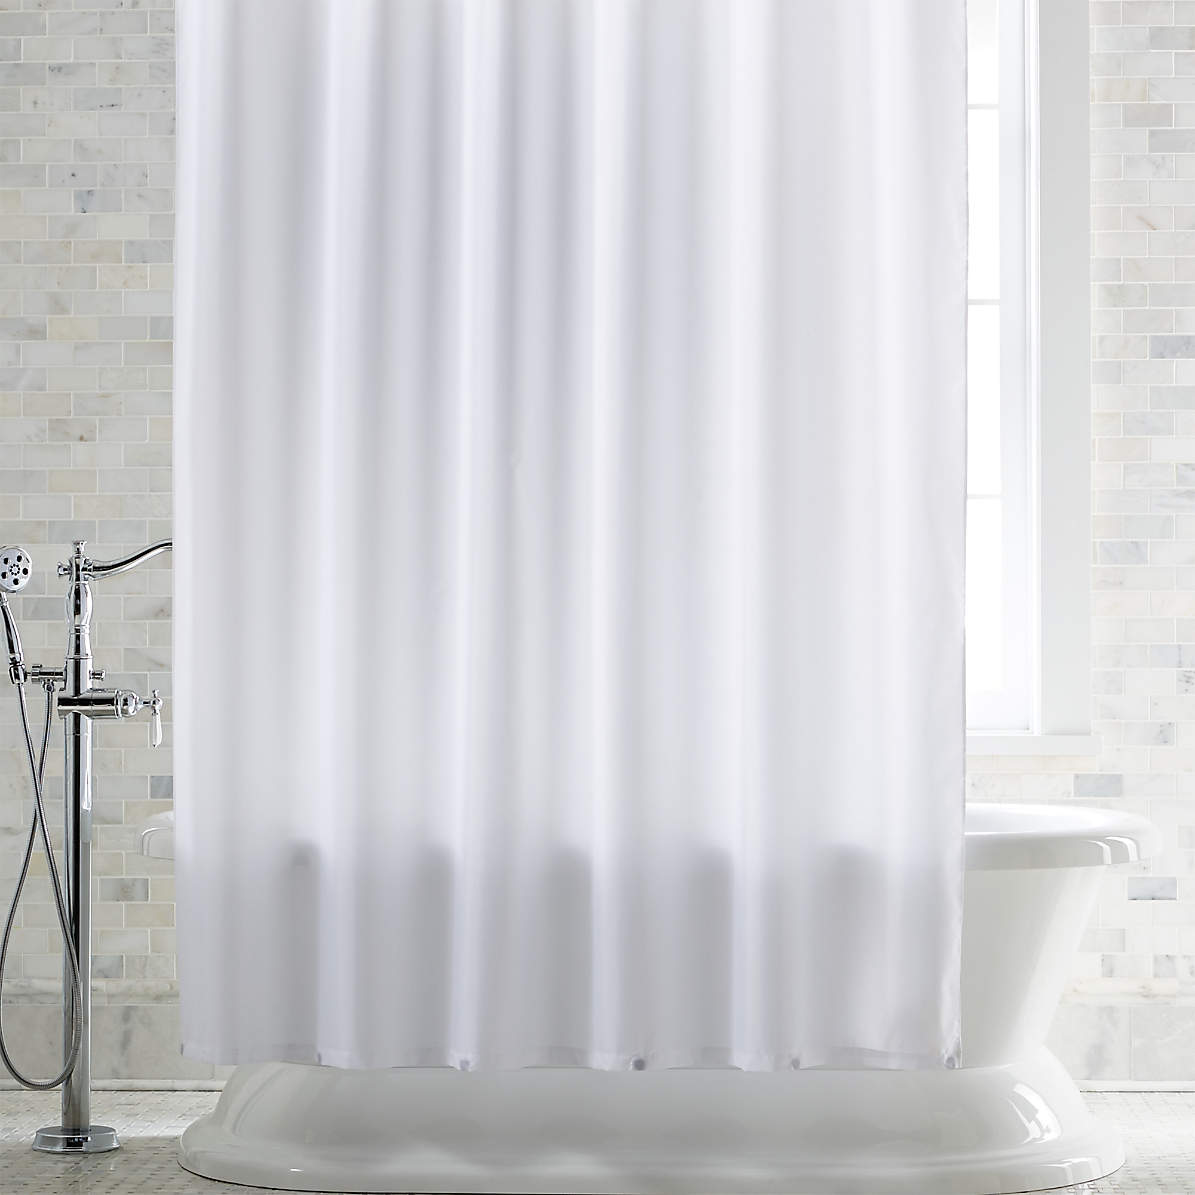 White Shower Curtain Liner With Magnets, Long White Shower Curtain